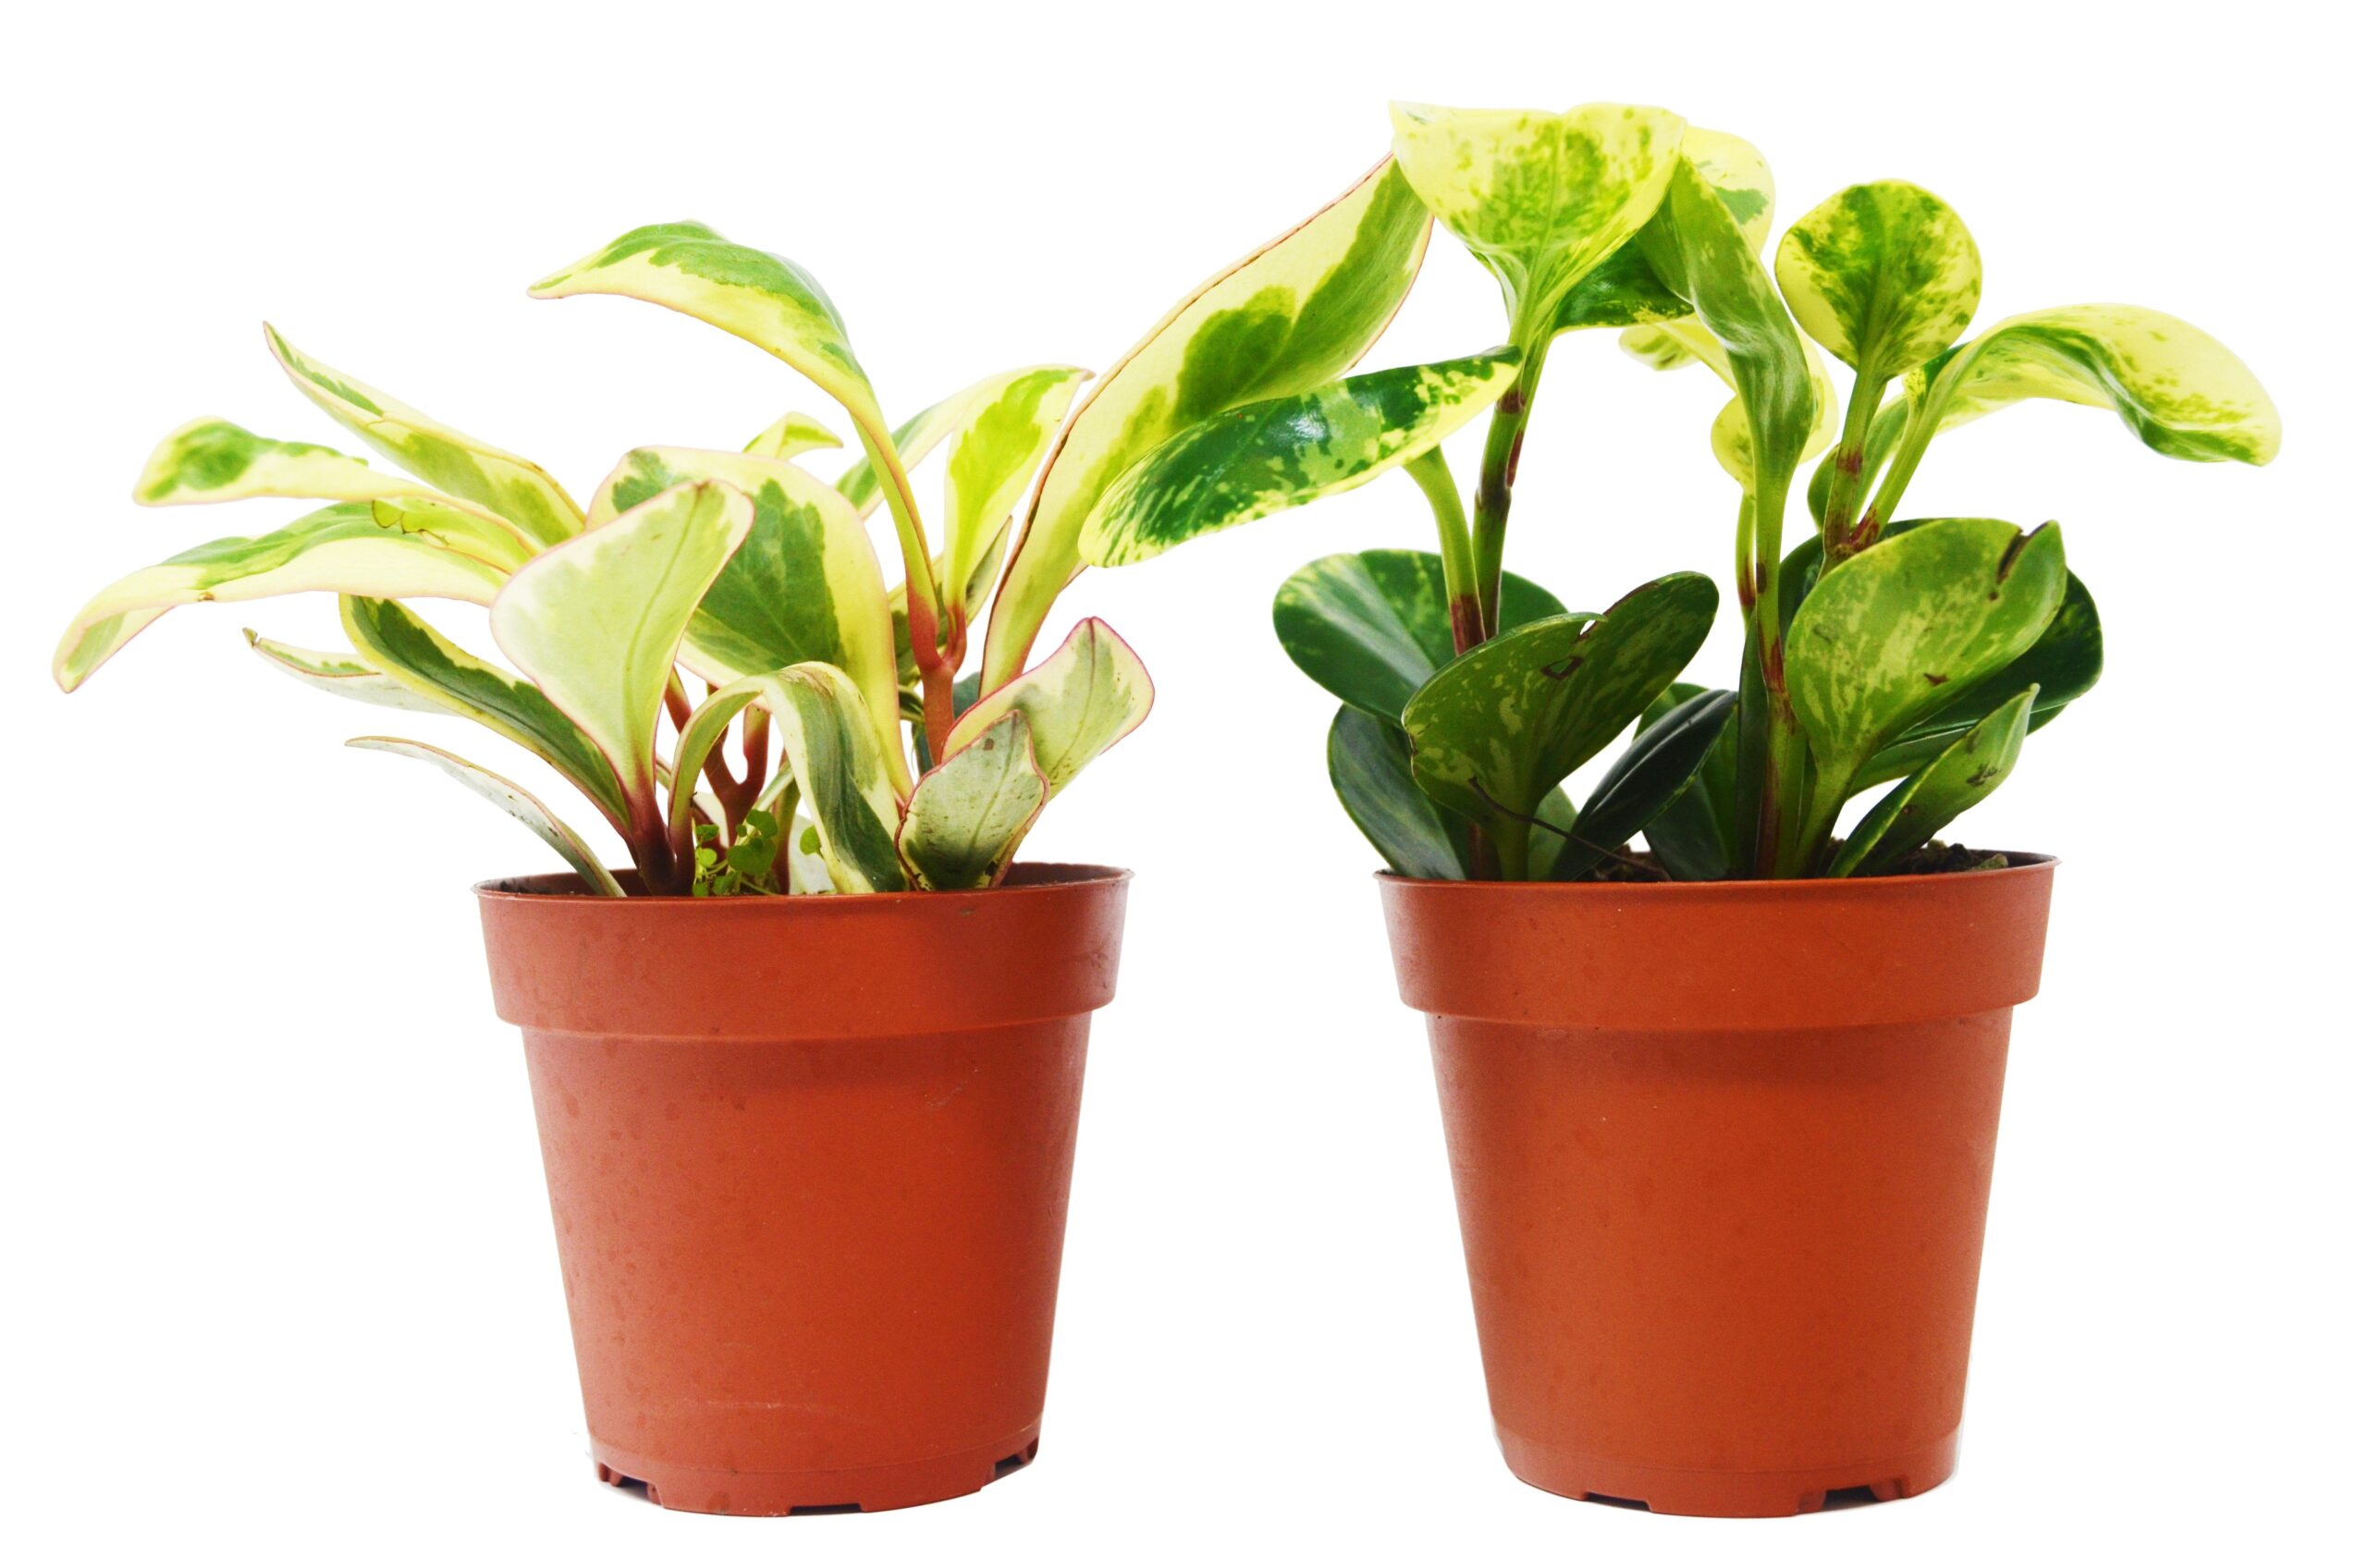 Two potted plants on a white background from a garden center near me.